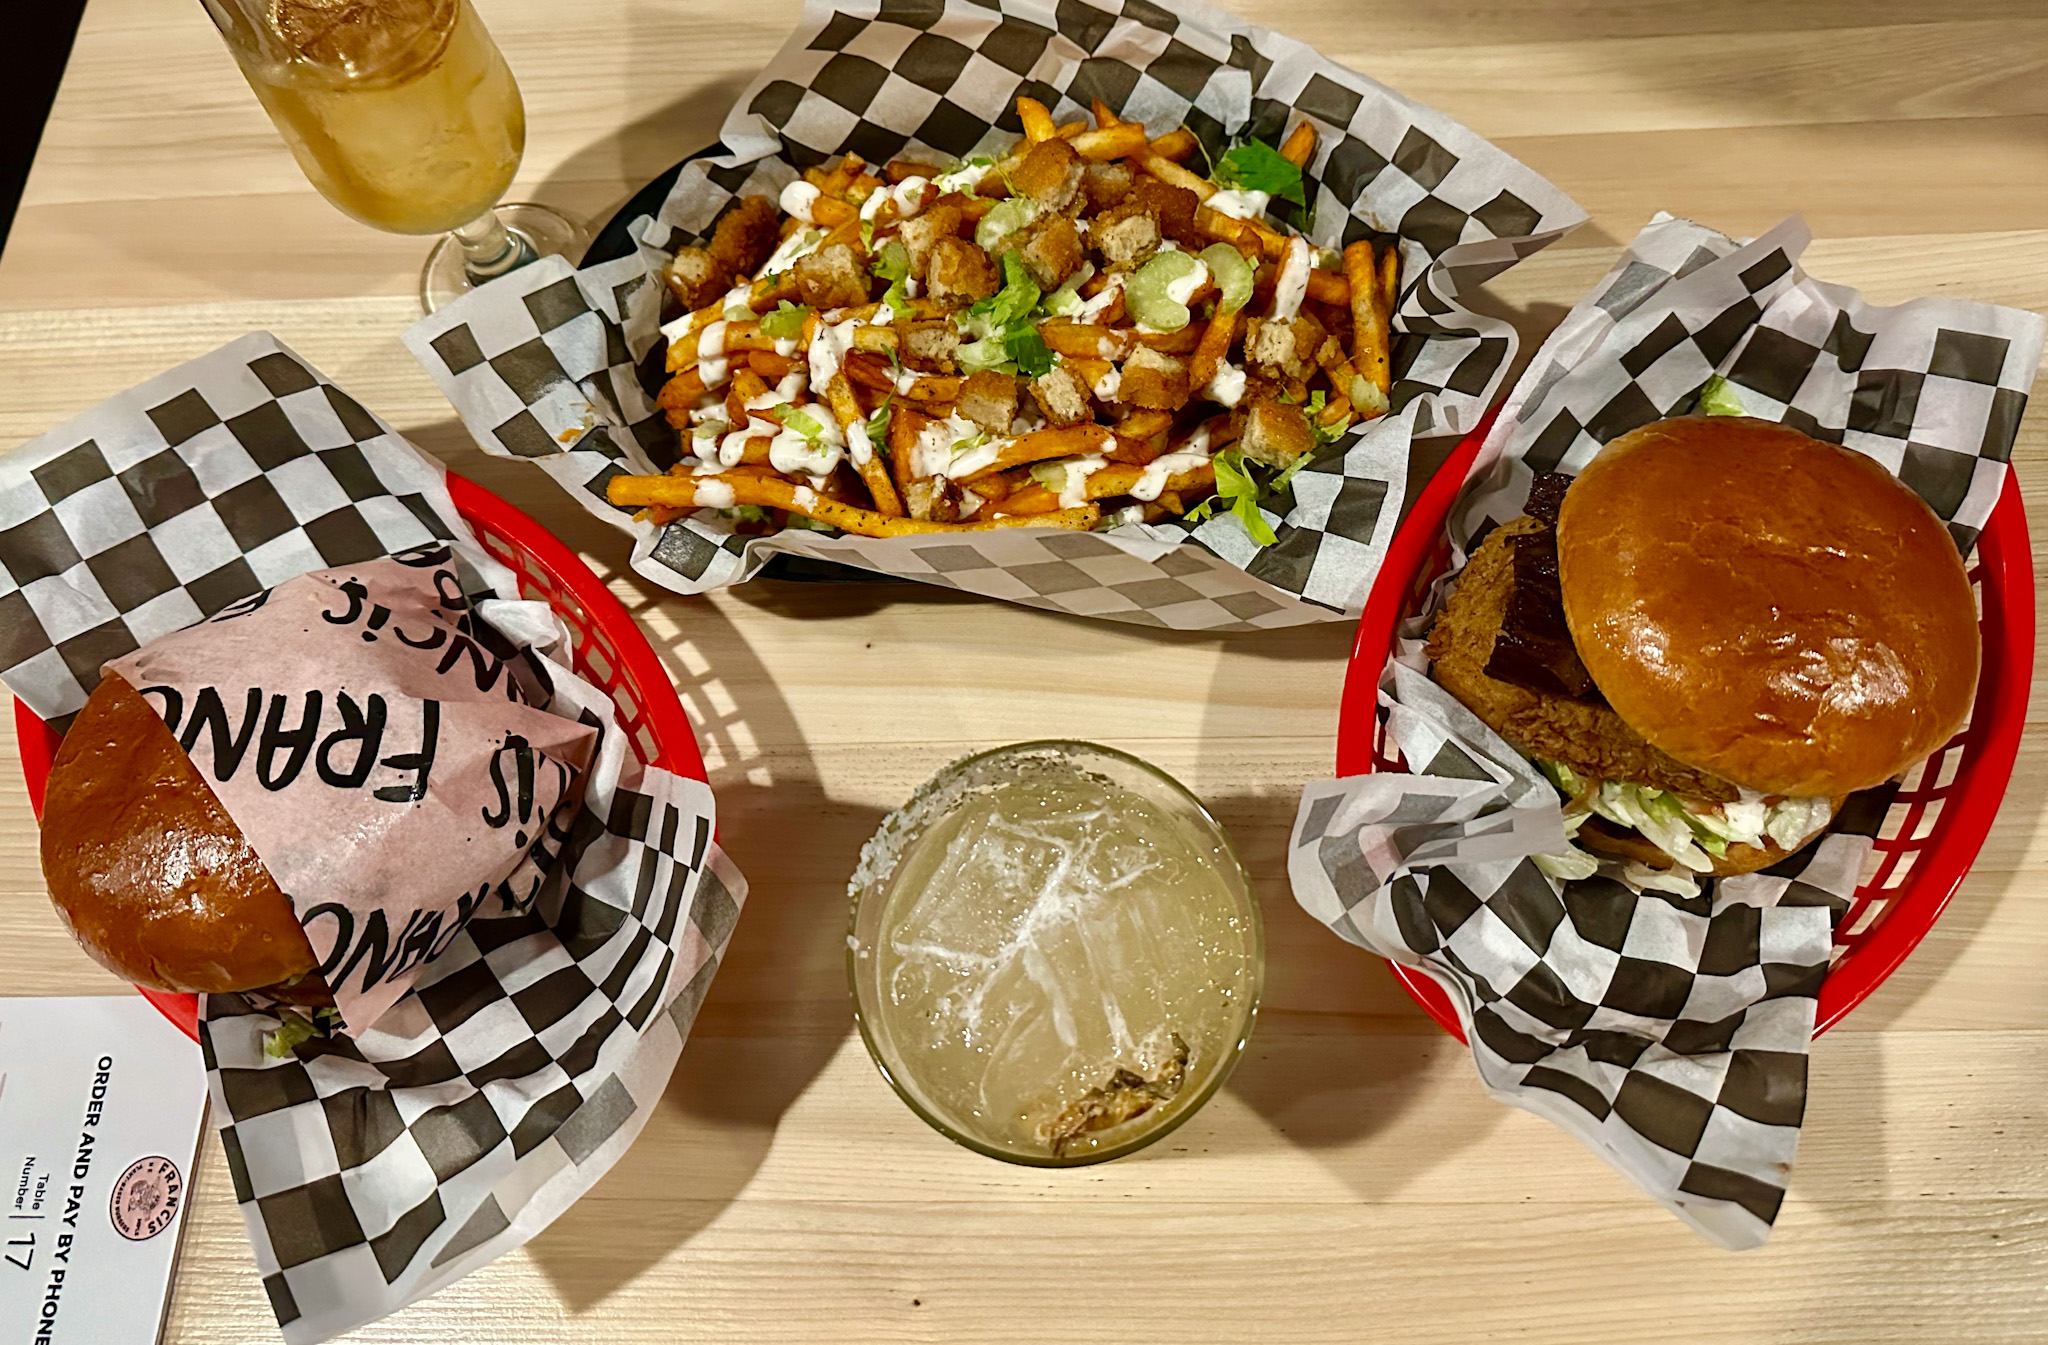 An overhead shot of two Francis sandwiches, a plate of buffalo fries, and two cocktails